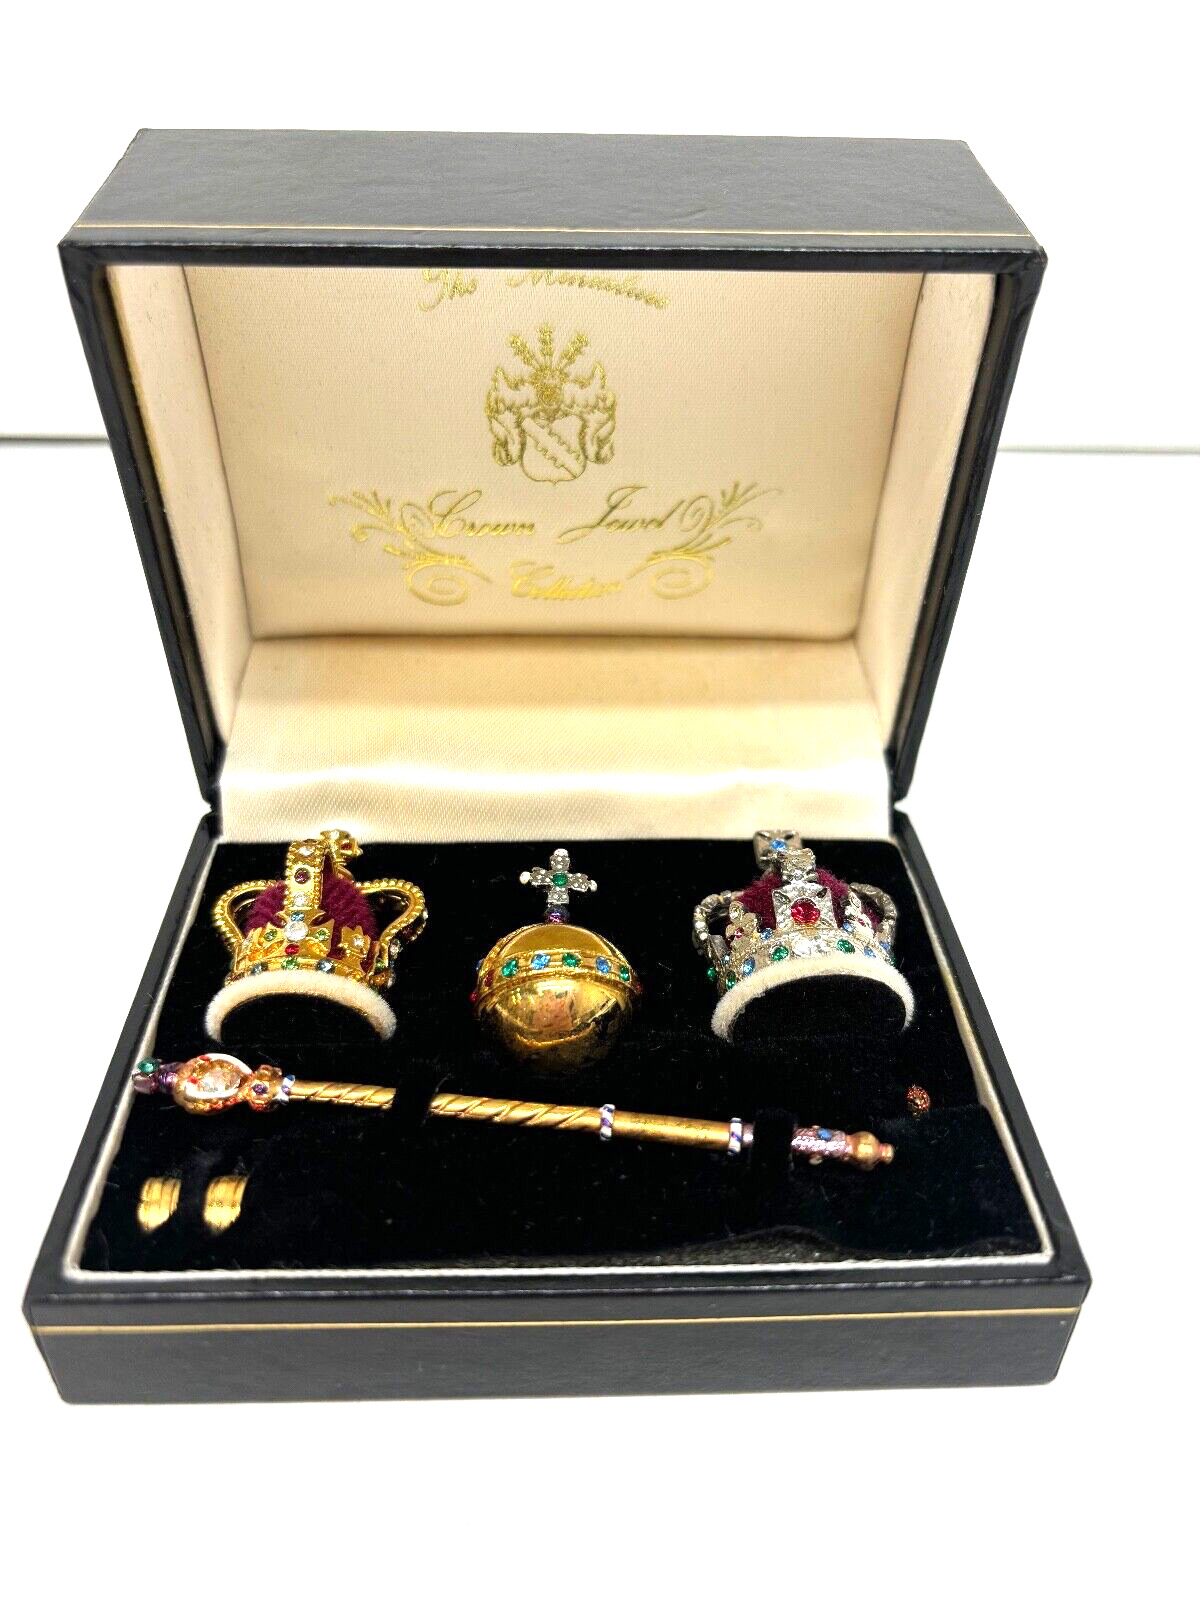 The Coronation Set of Miniatures - Past Times Set of Crown Jewels